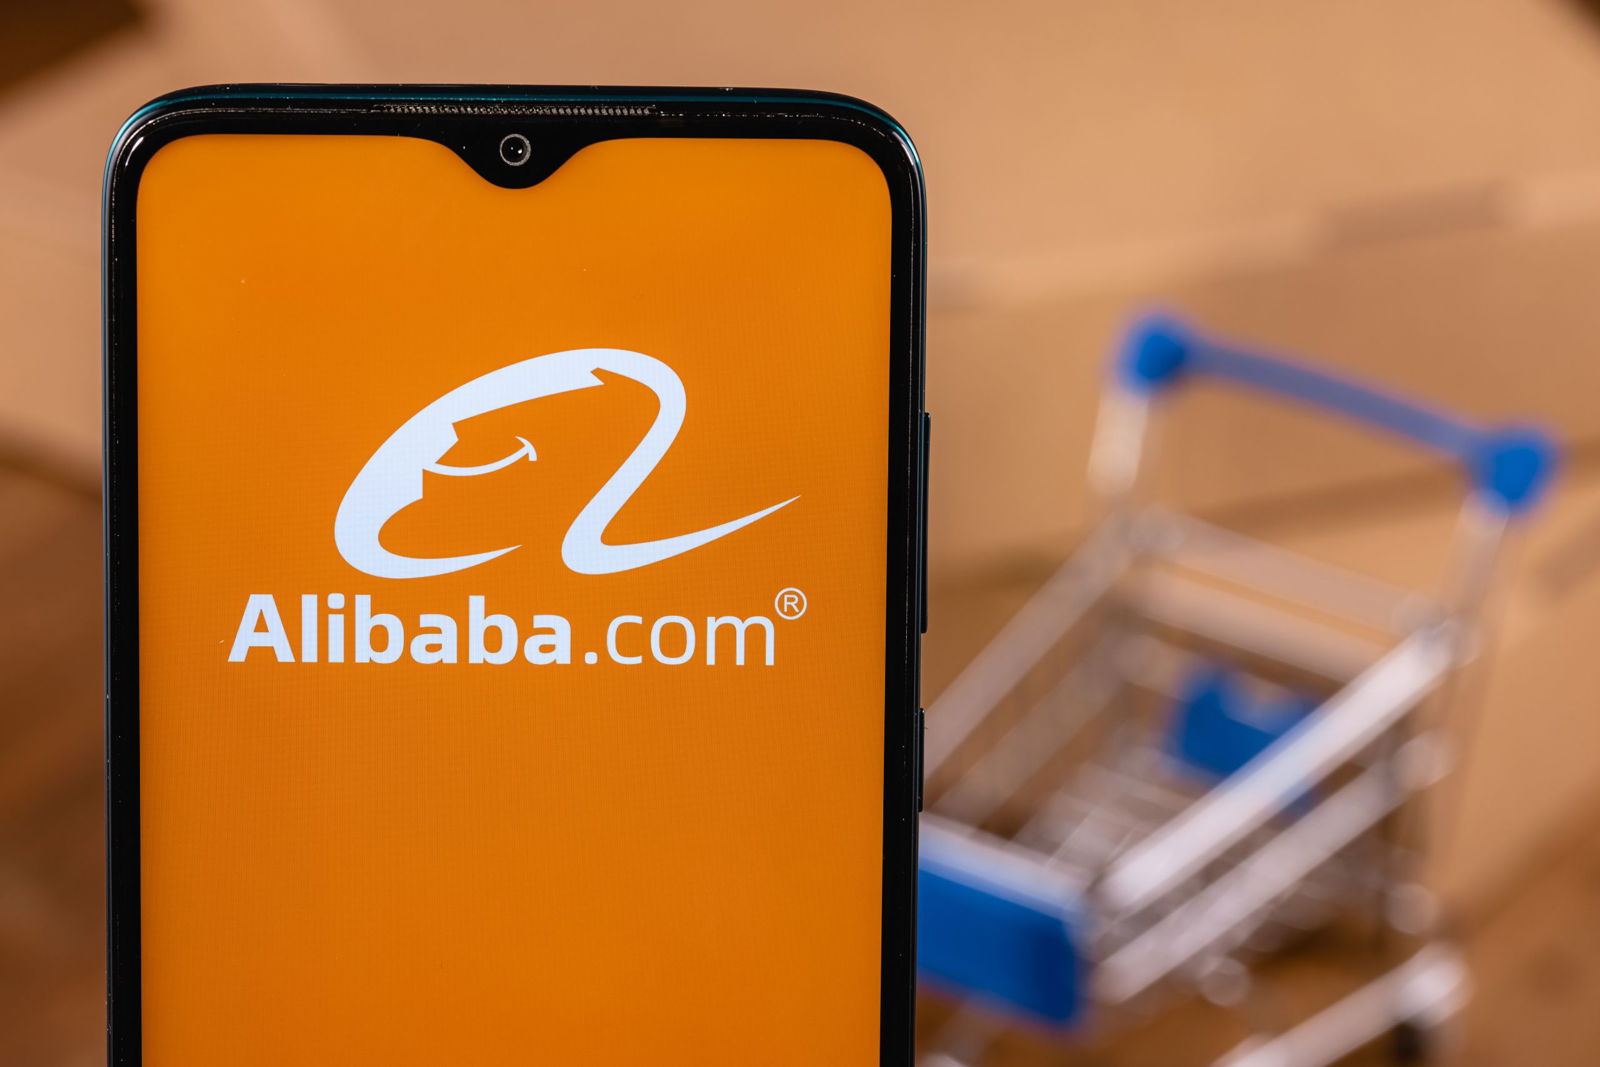 Read more about the article Alibaba Stock: An unpromising development due to tensions or optimistic future prospects?